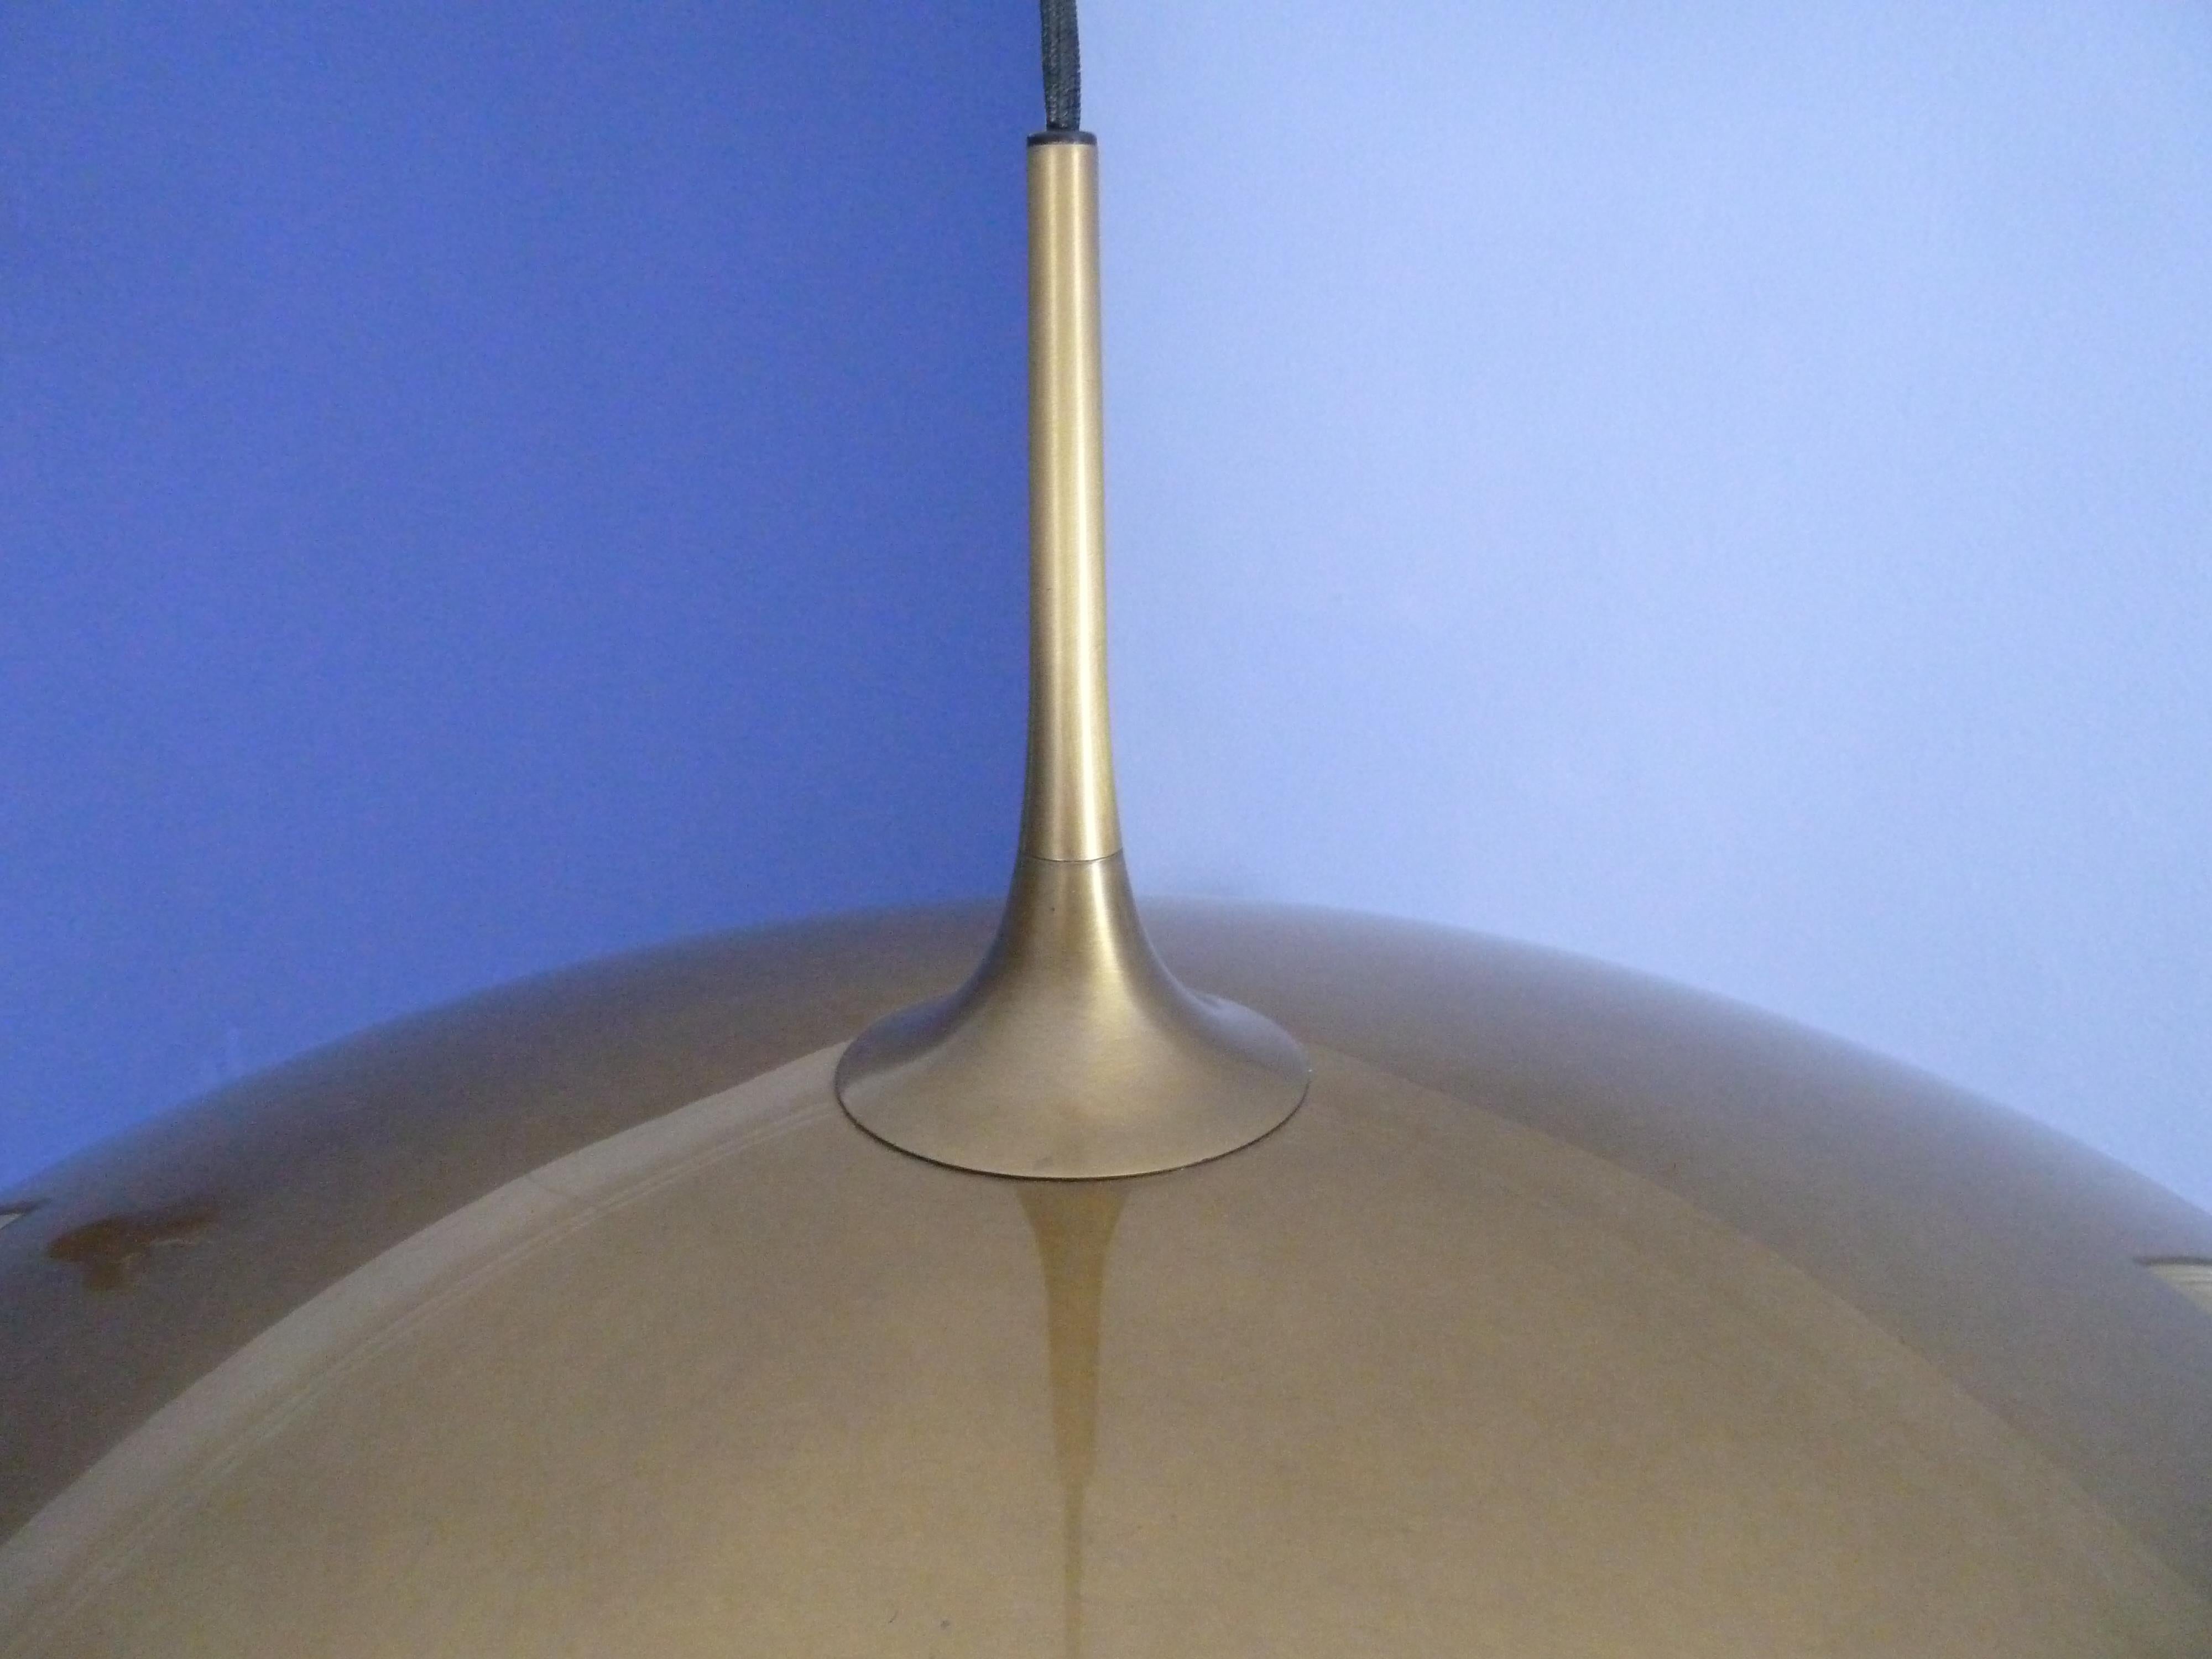 Late 20th Century Adjustable Brass Pendant Onos55 by Florian Schulz with a Central Counterweight